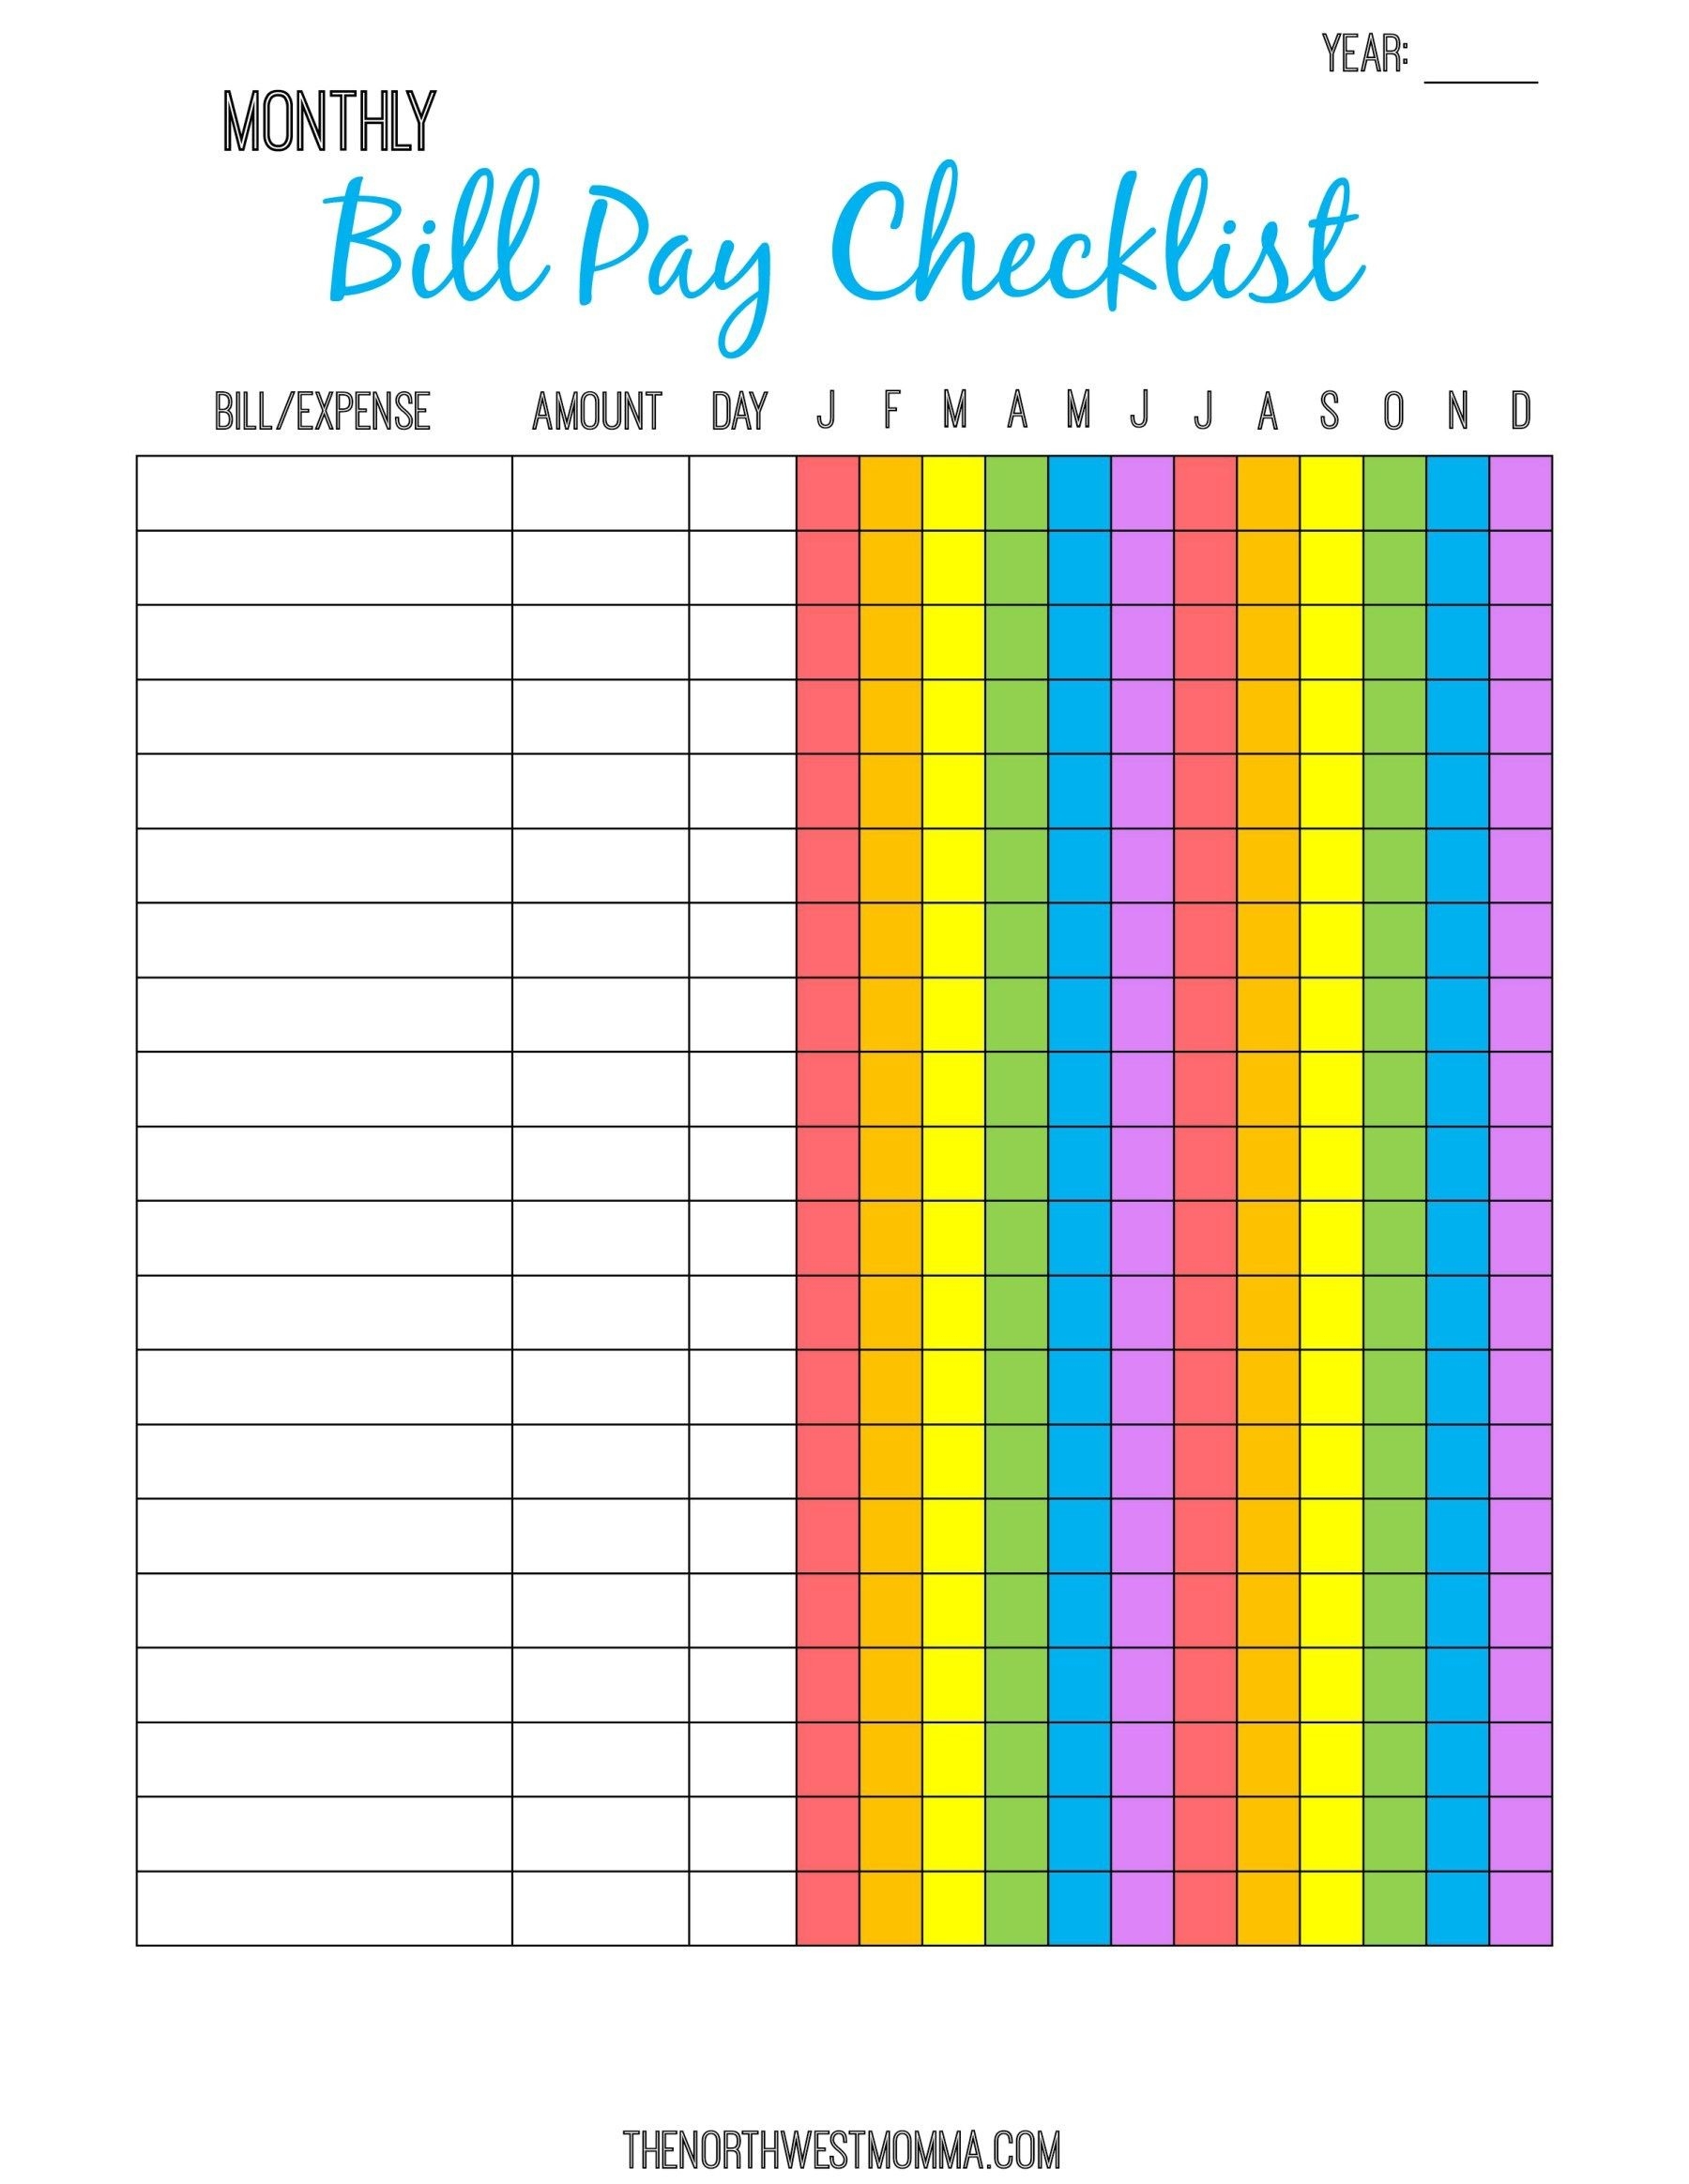 Monthly Bill Pay Checklist- Free Printable! | Bill Payment-Monthly Bill List Printable